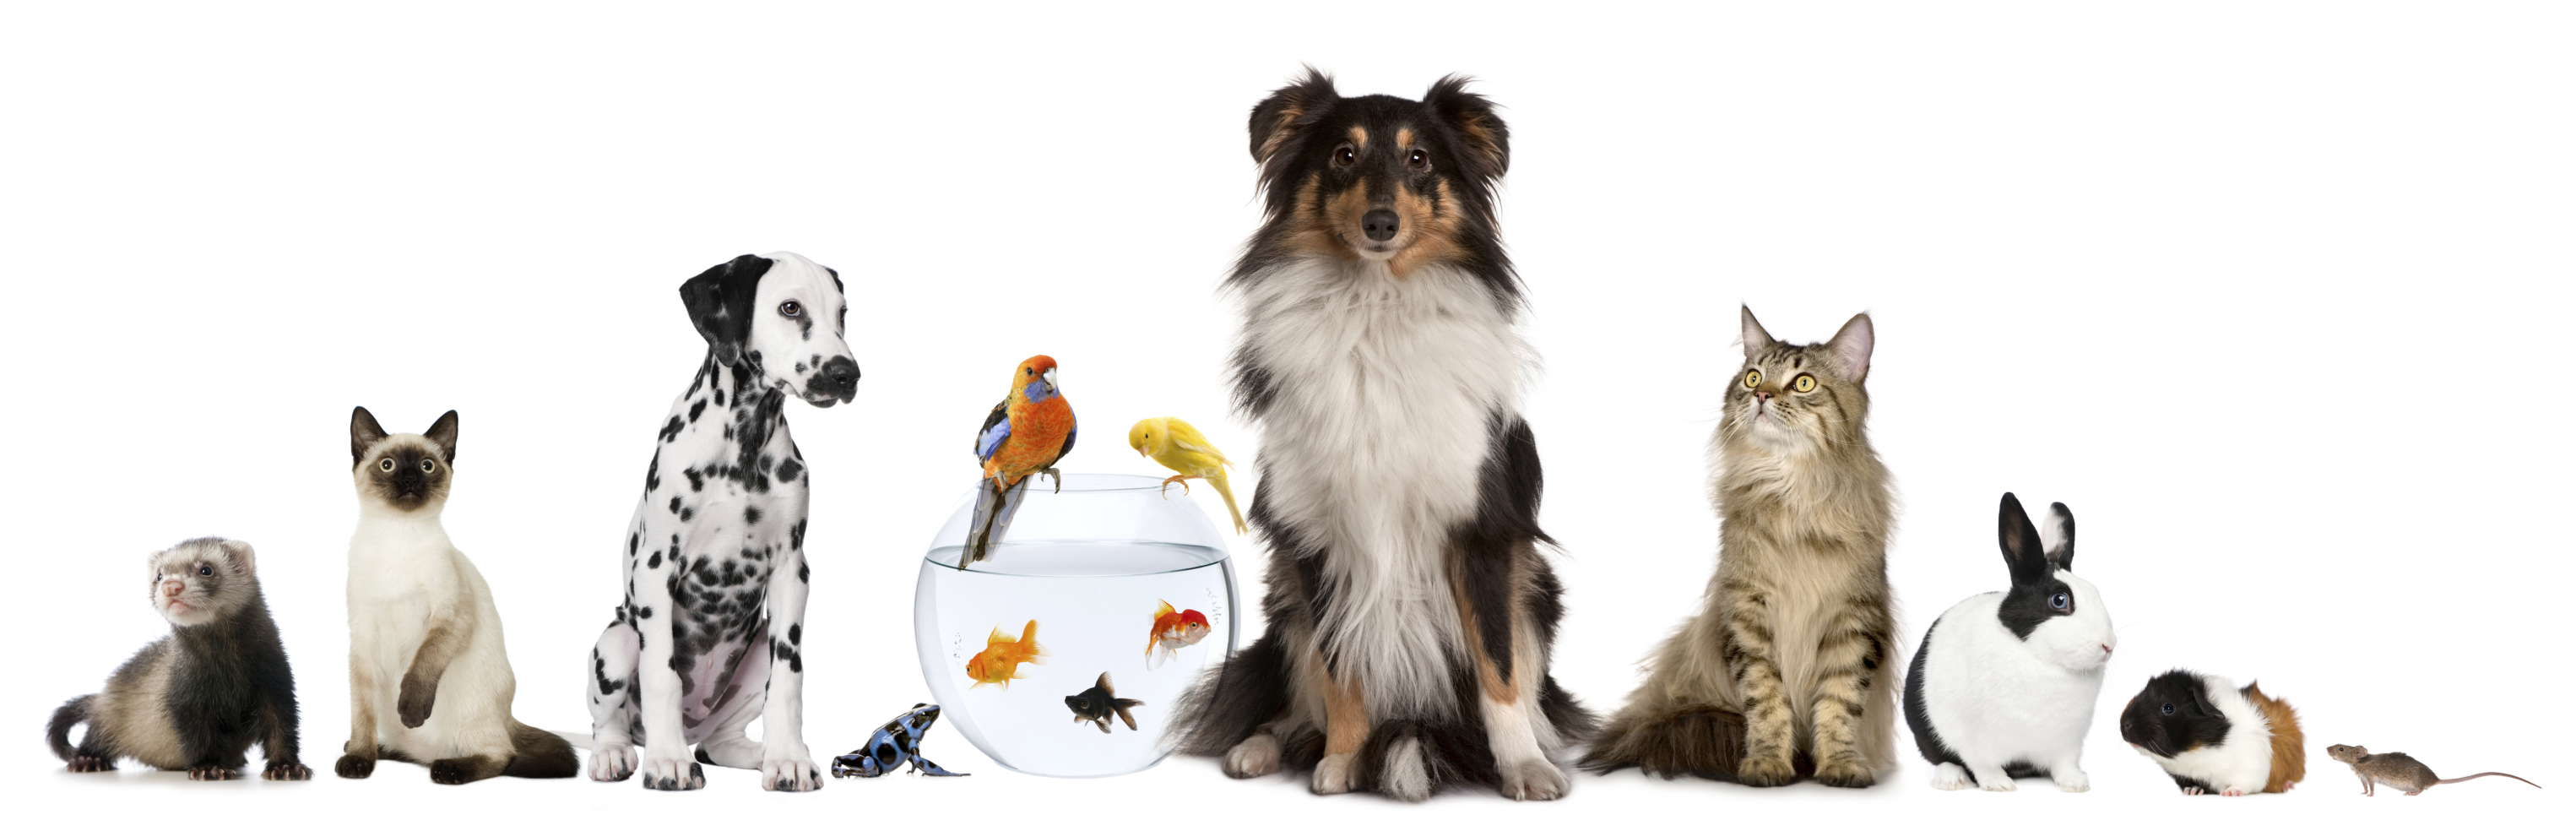 Group of pets sitting, white background.